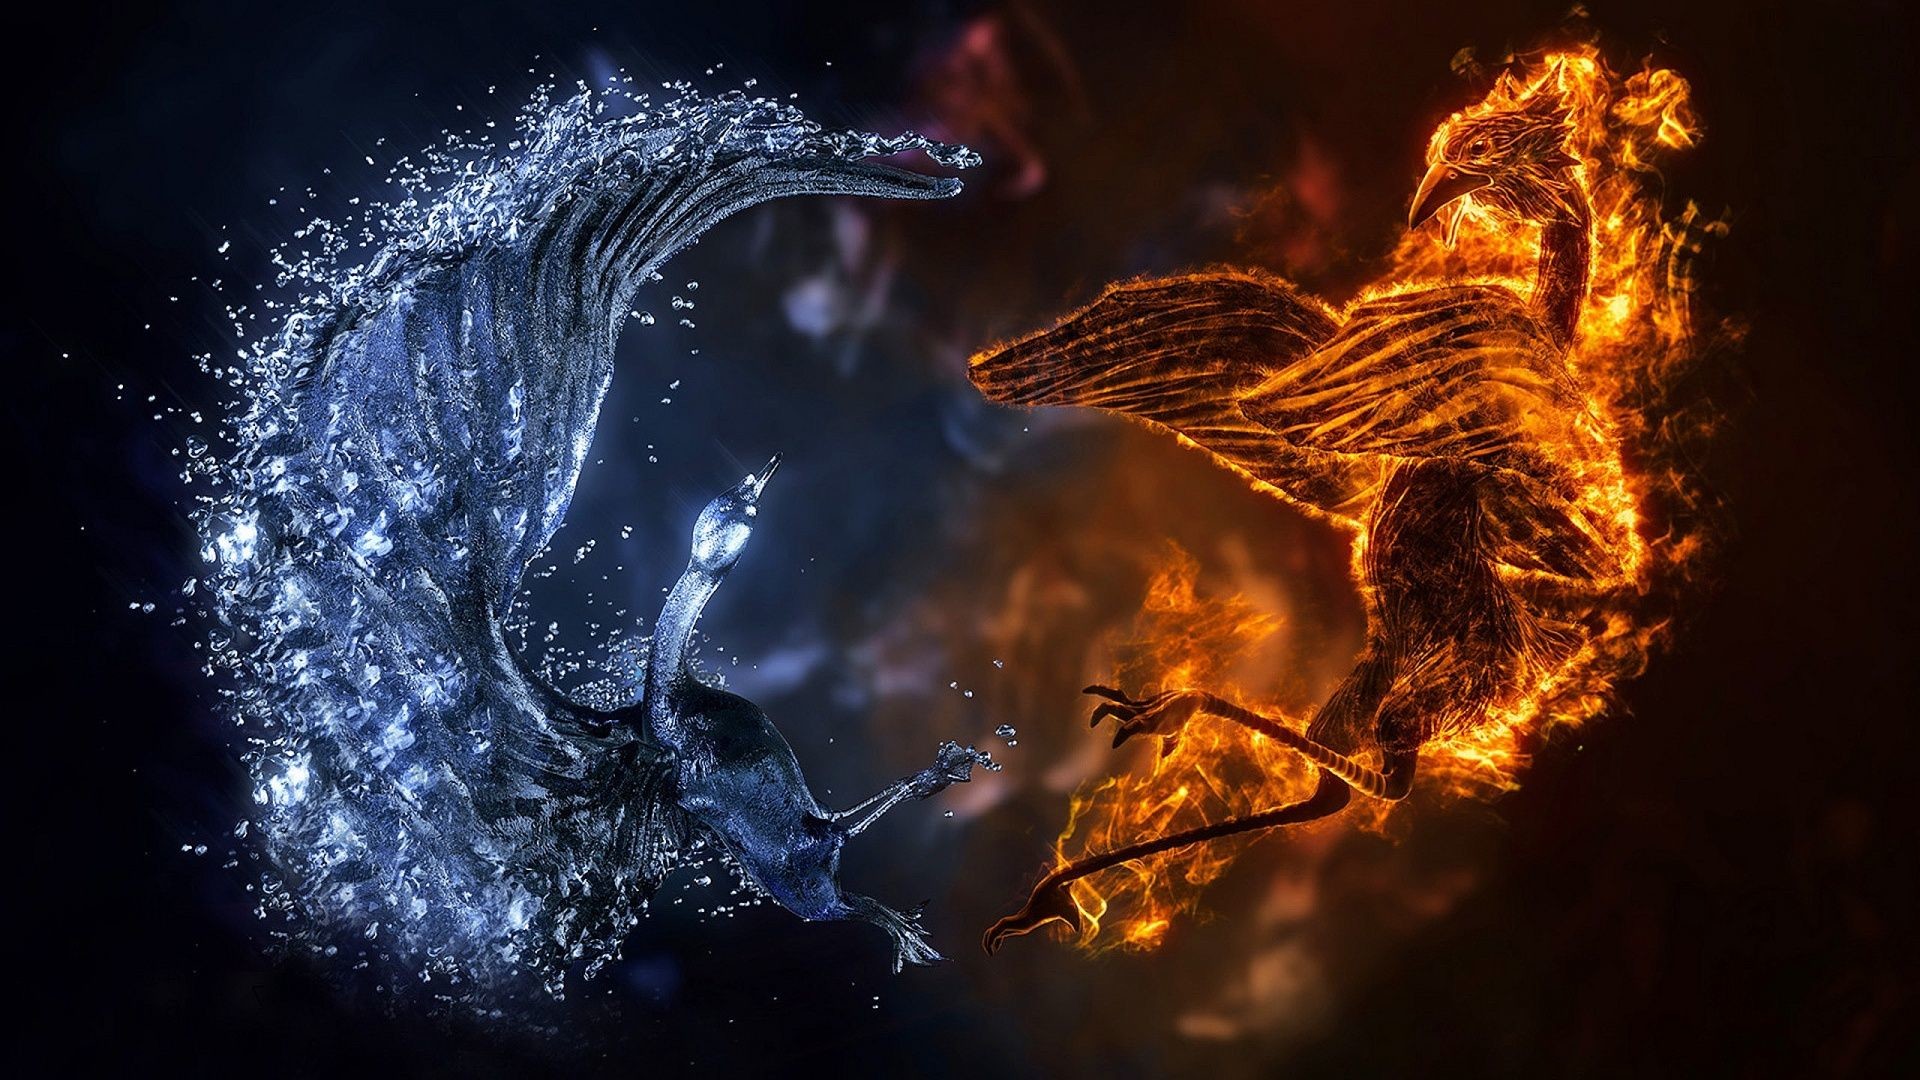 1920x1080 #Fire and Ice Wallpapers [1920 1080] #Hdwallpaper #wallpaper #image